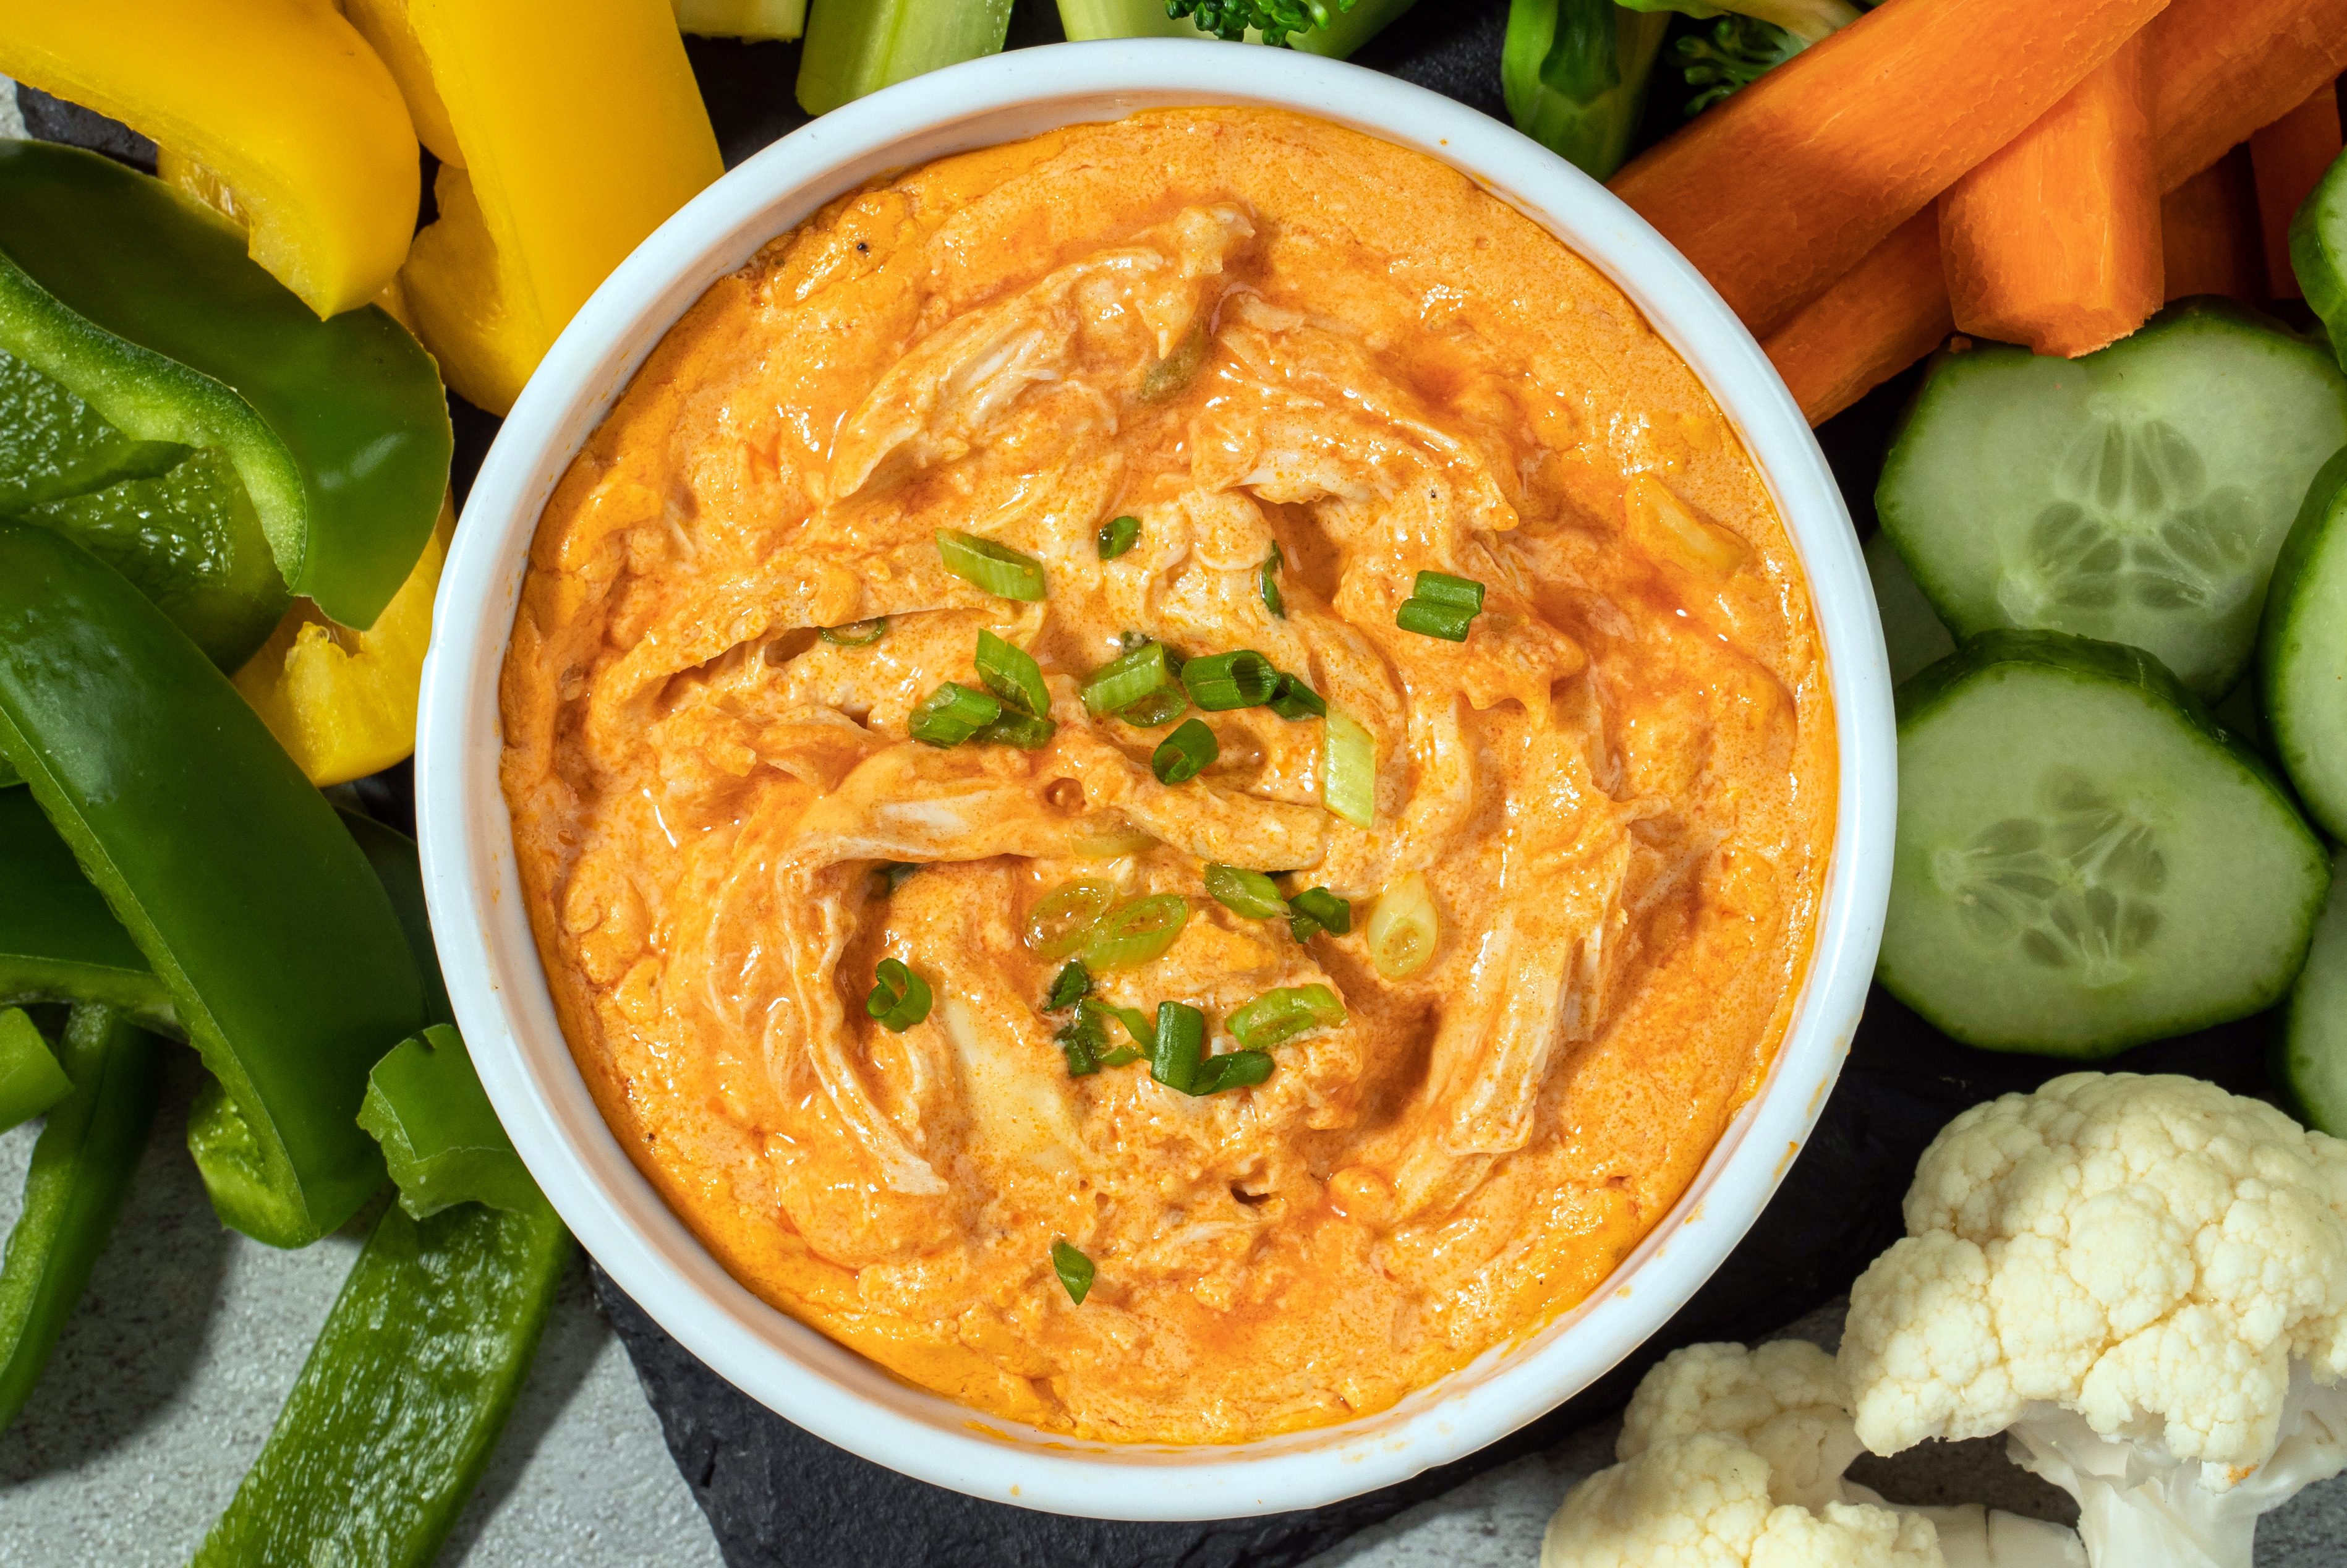 Buffalo chicken dip will really tie your Super Bowl party together